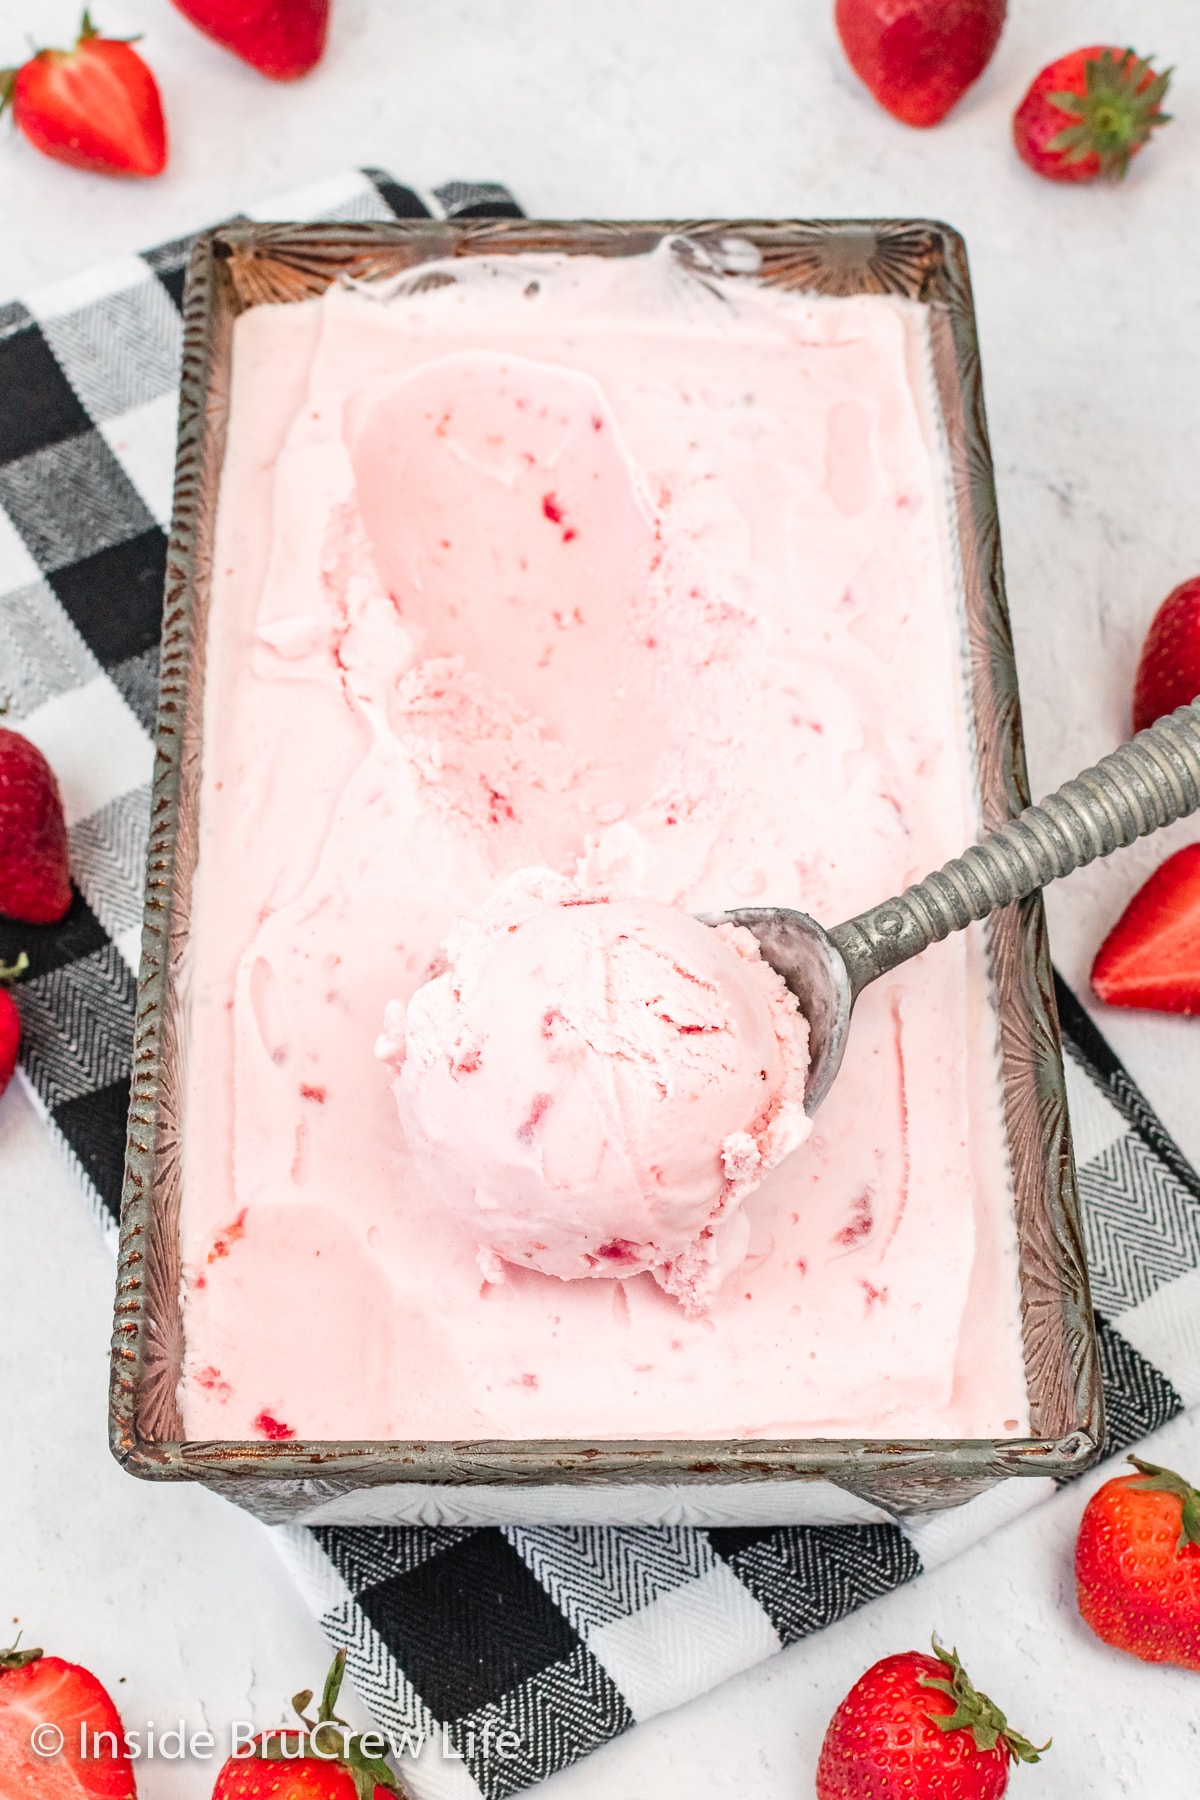 A metal pan filled with strawberry ice cream.